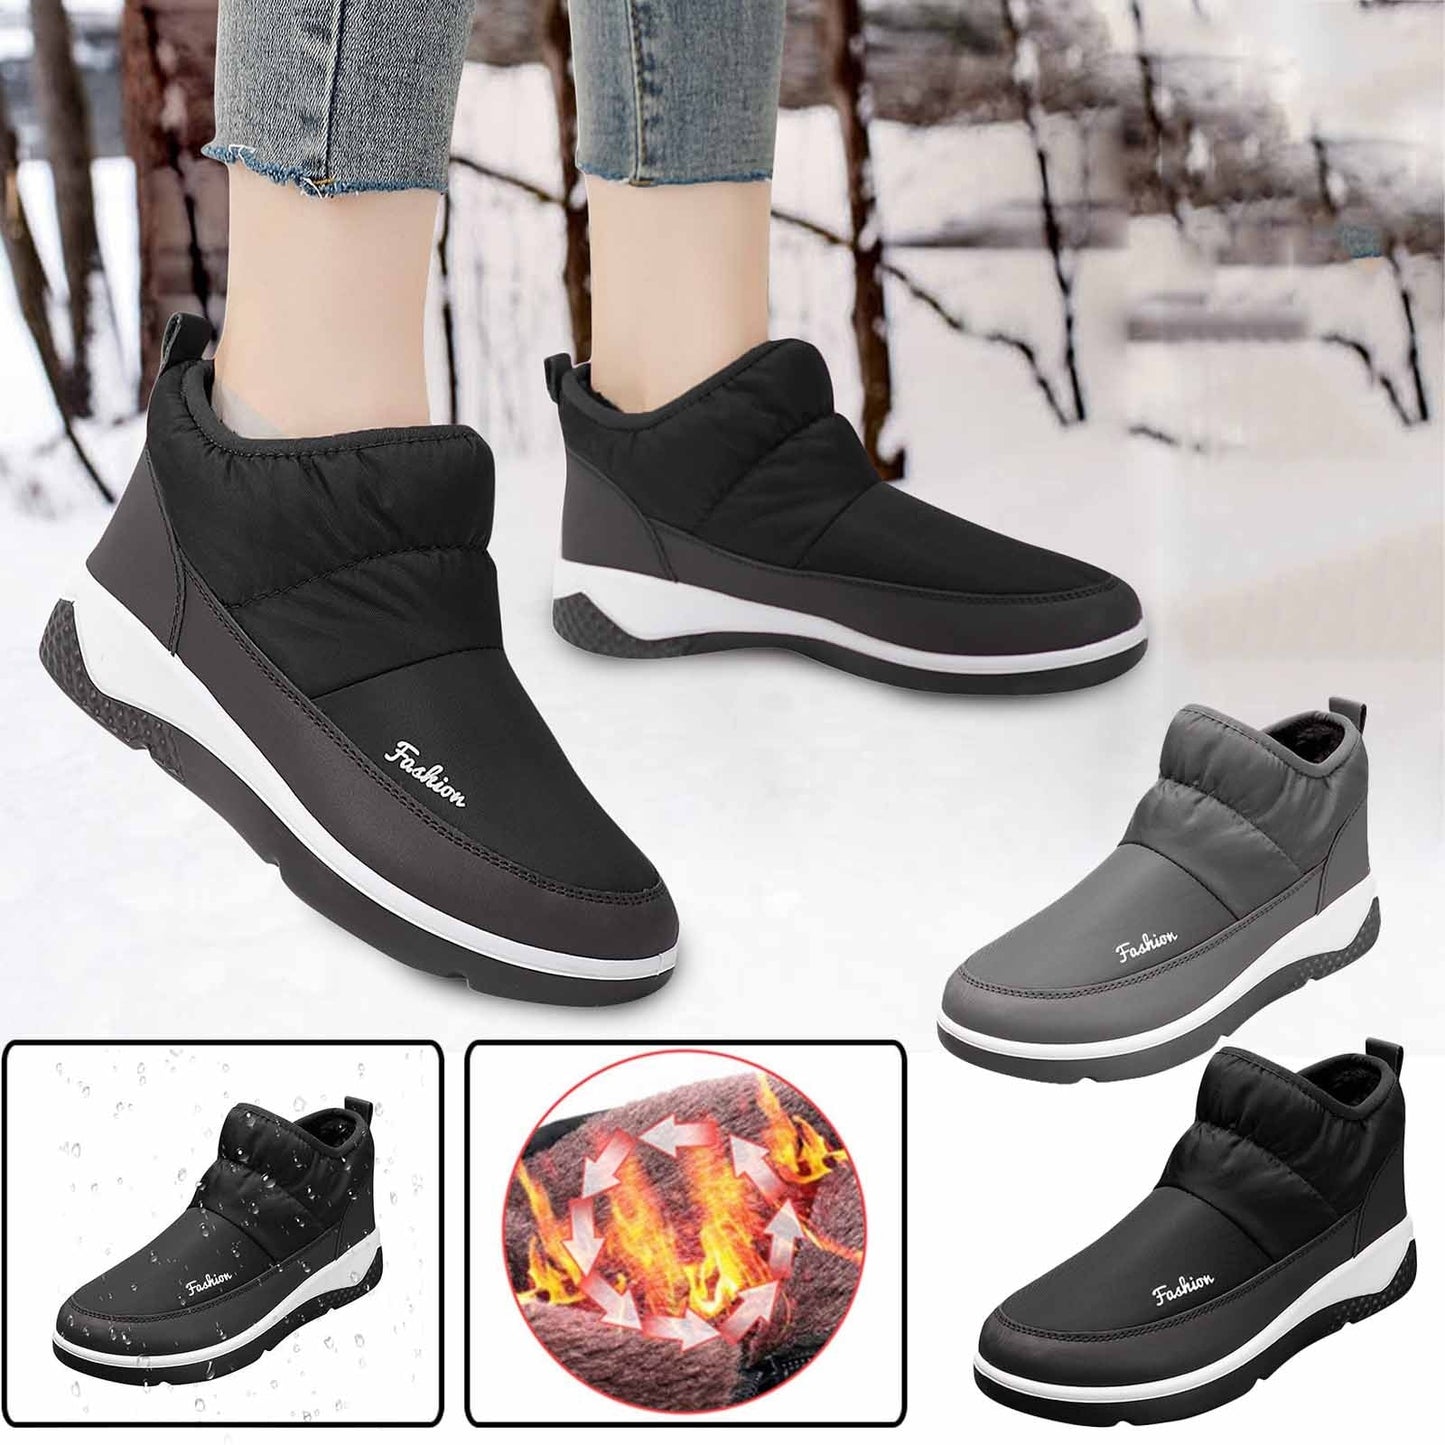 OCW Orthopedic Women Boots Arch Support Warm Waterproof Ankle Boots